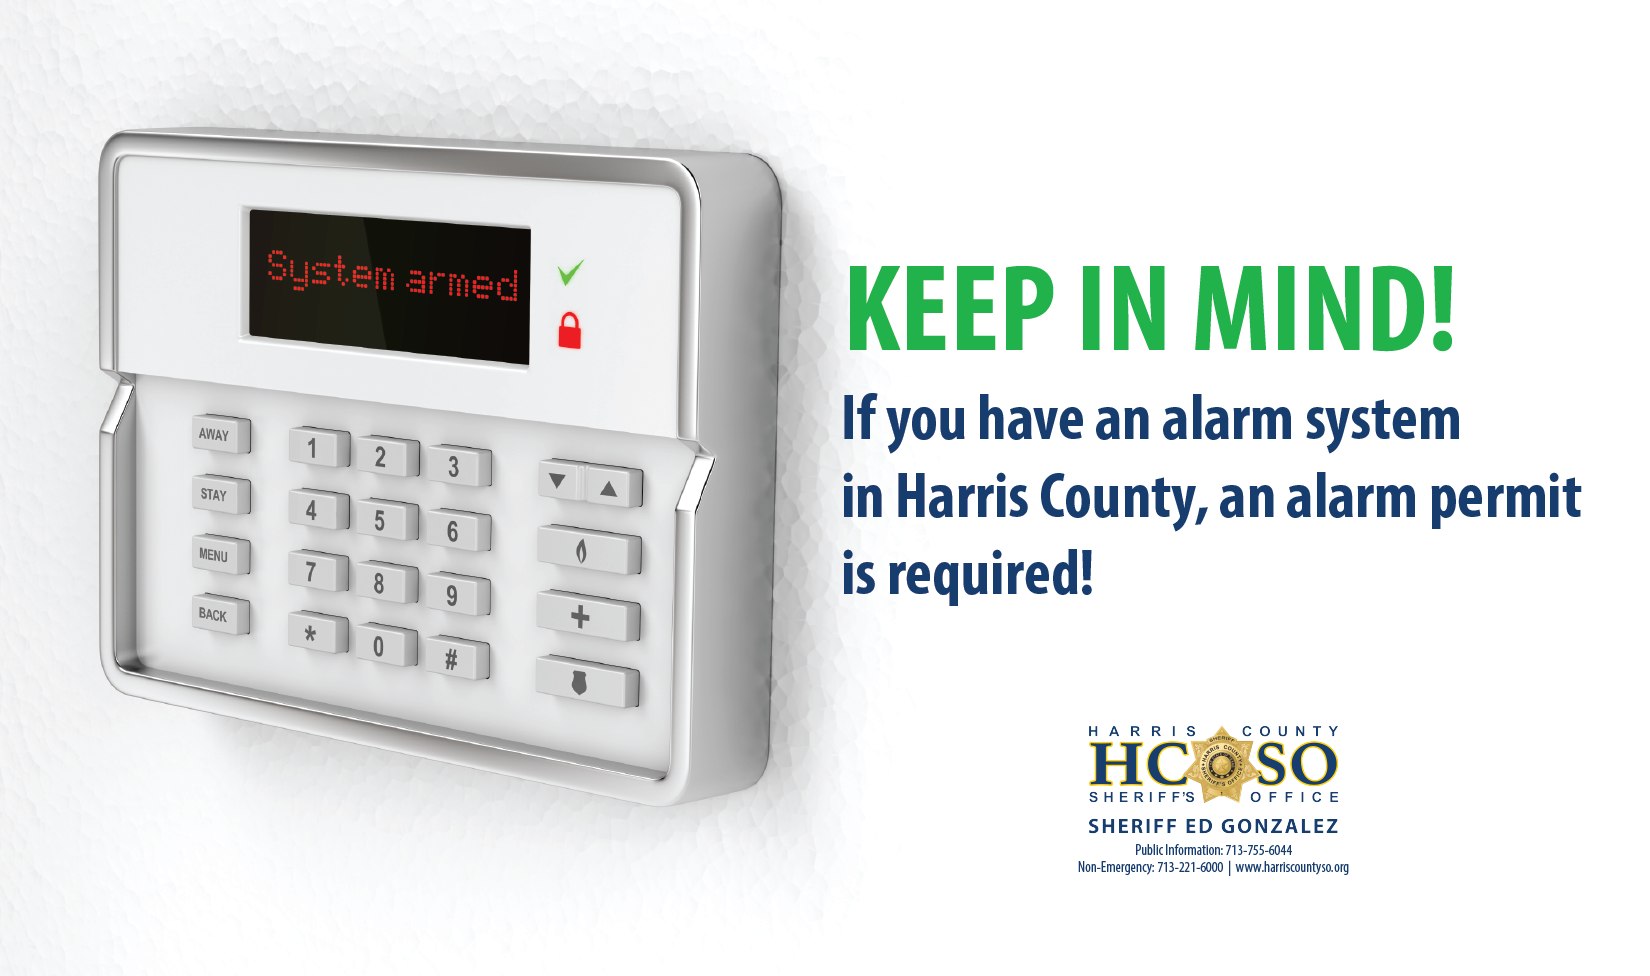 Protect Your Home: Register Your Alarm System with Harris County